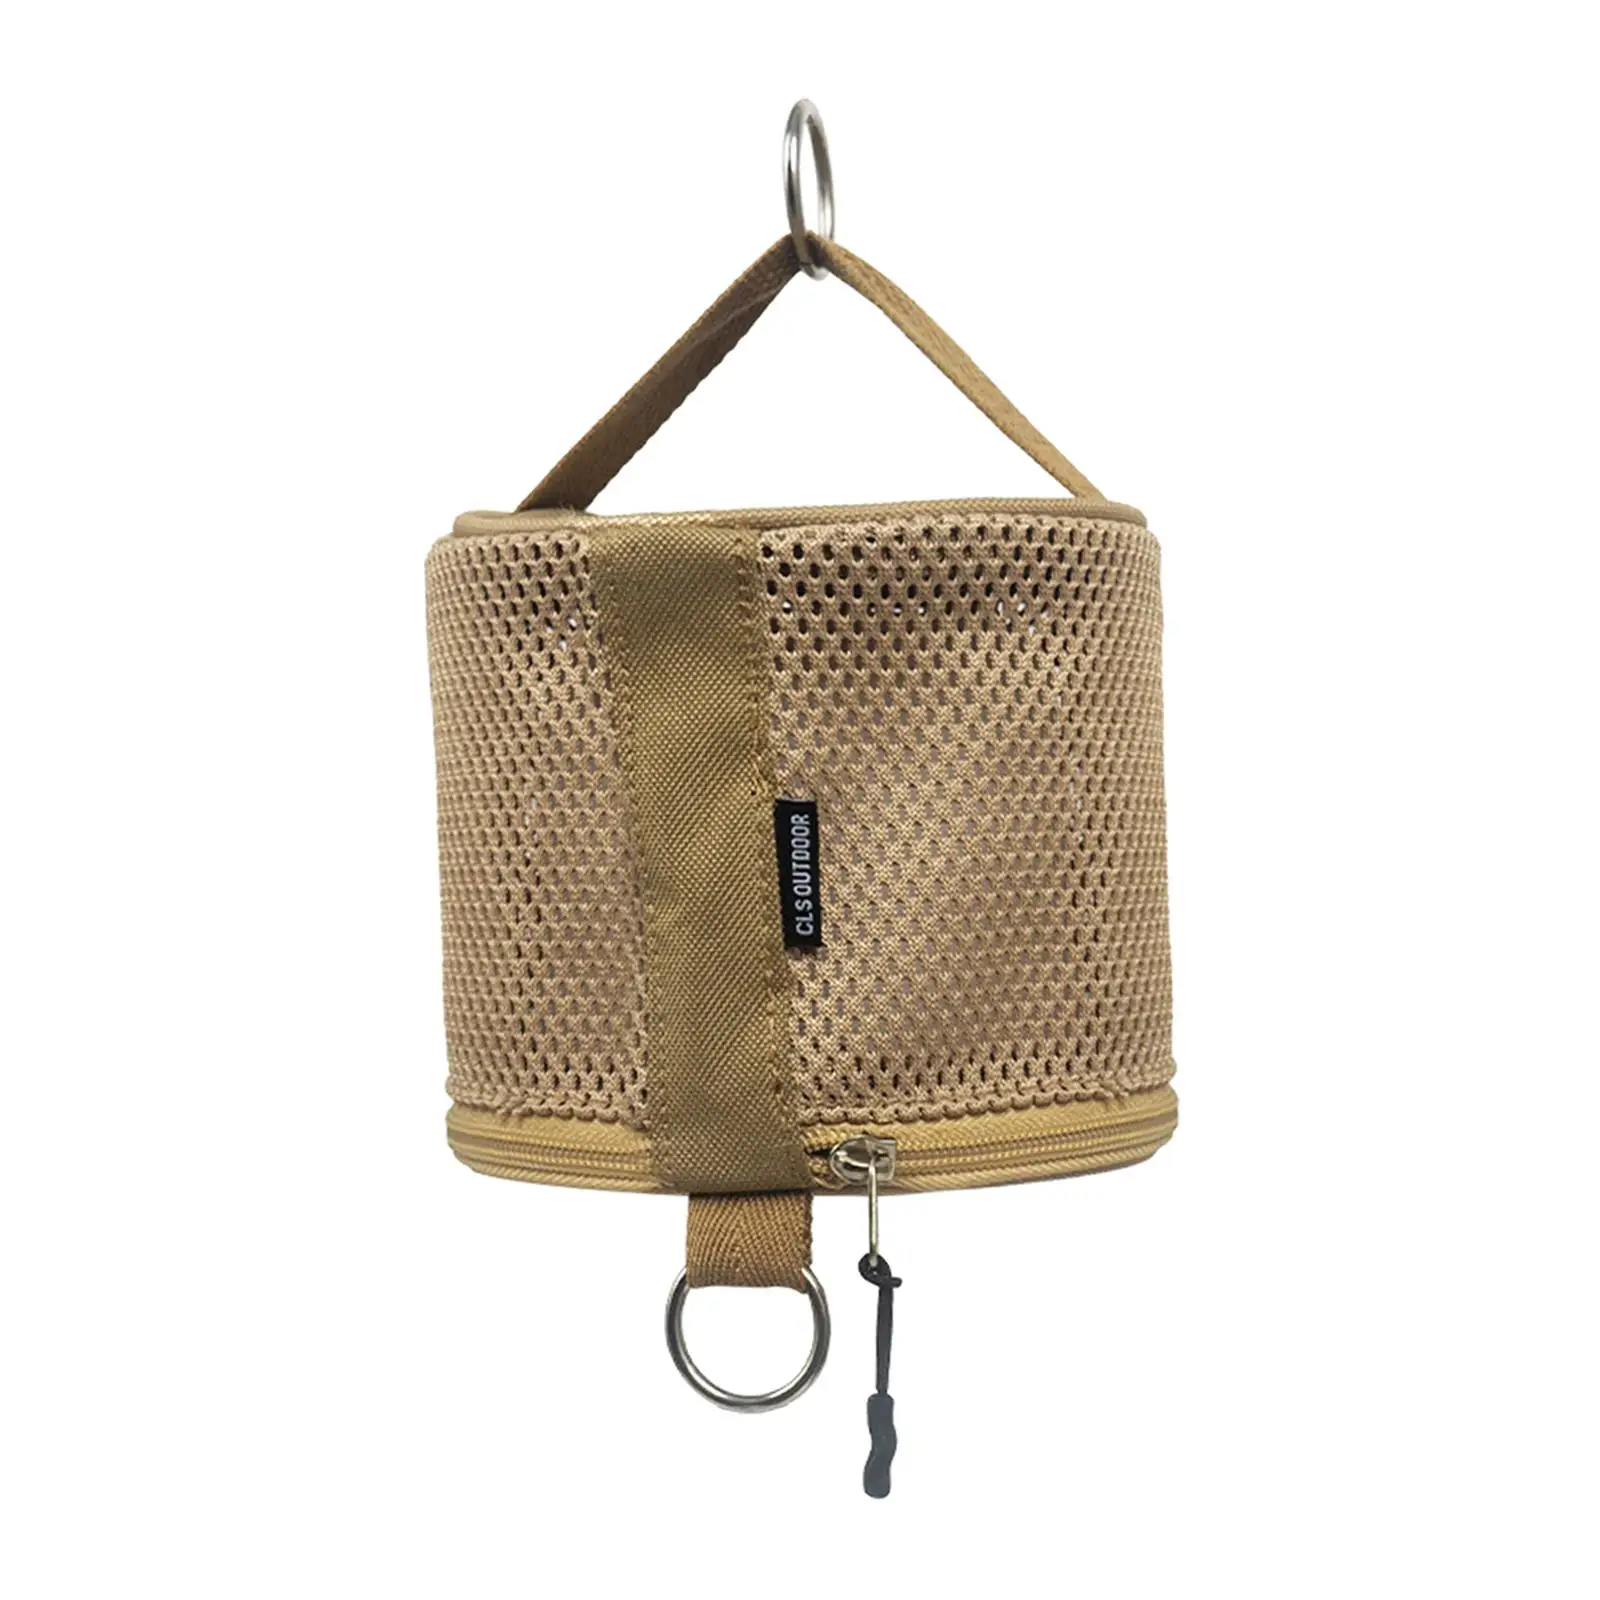 Outdoor Toilet Paper Holder, Hanging Paper Roll Holder with Metal Rings, Travel